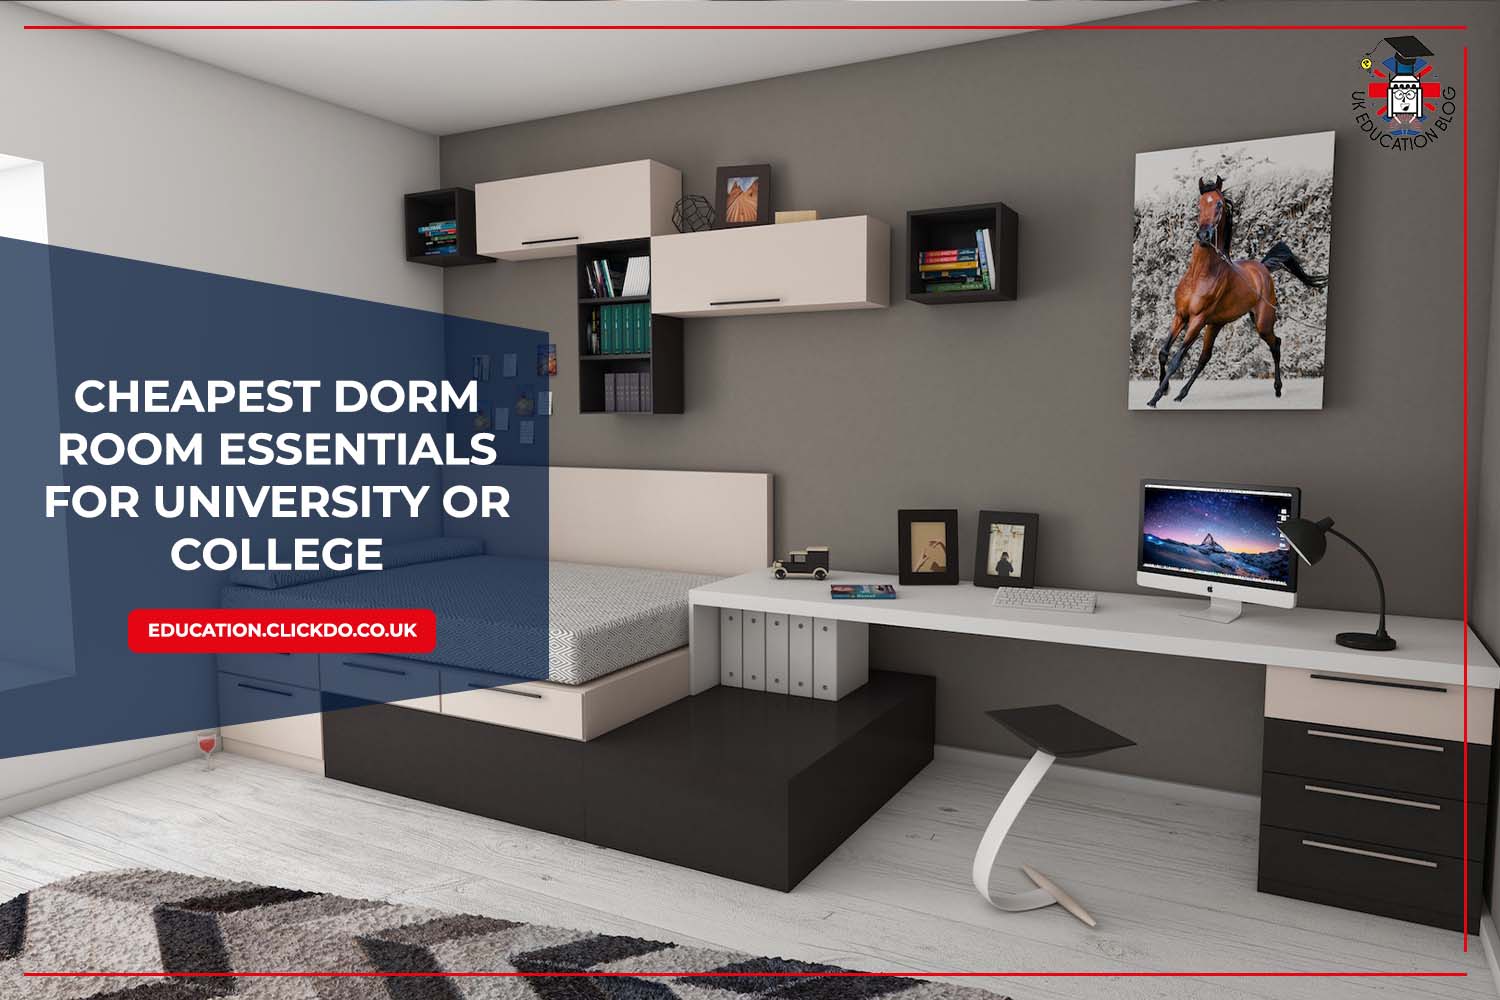 Dorm room essentials for college students - Reviewed